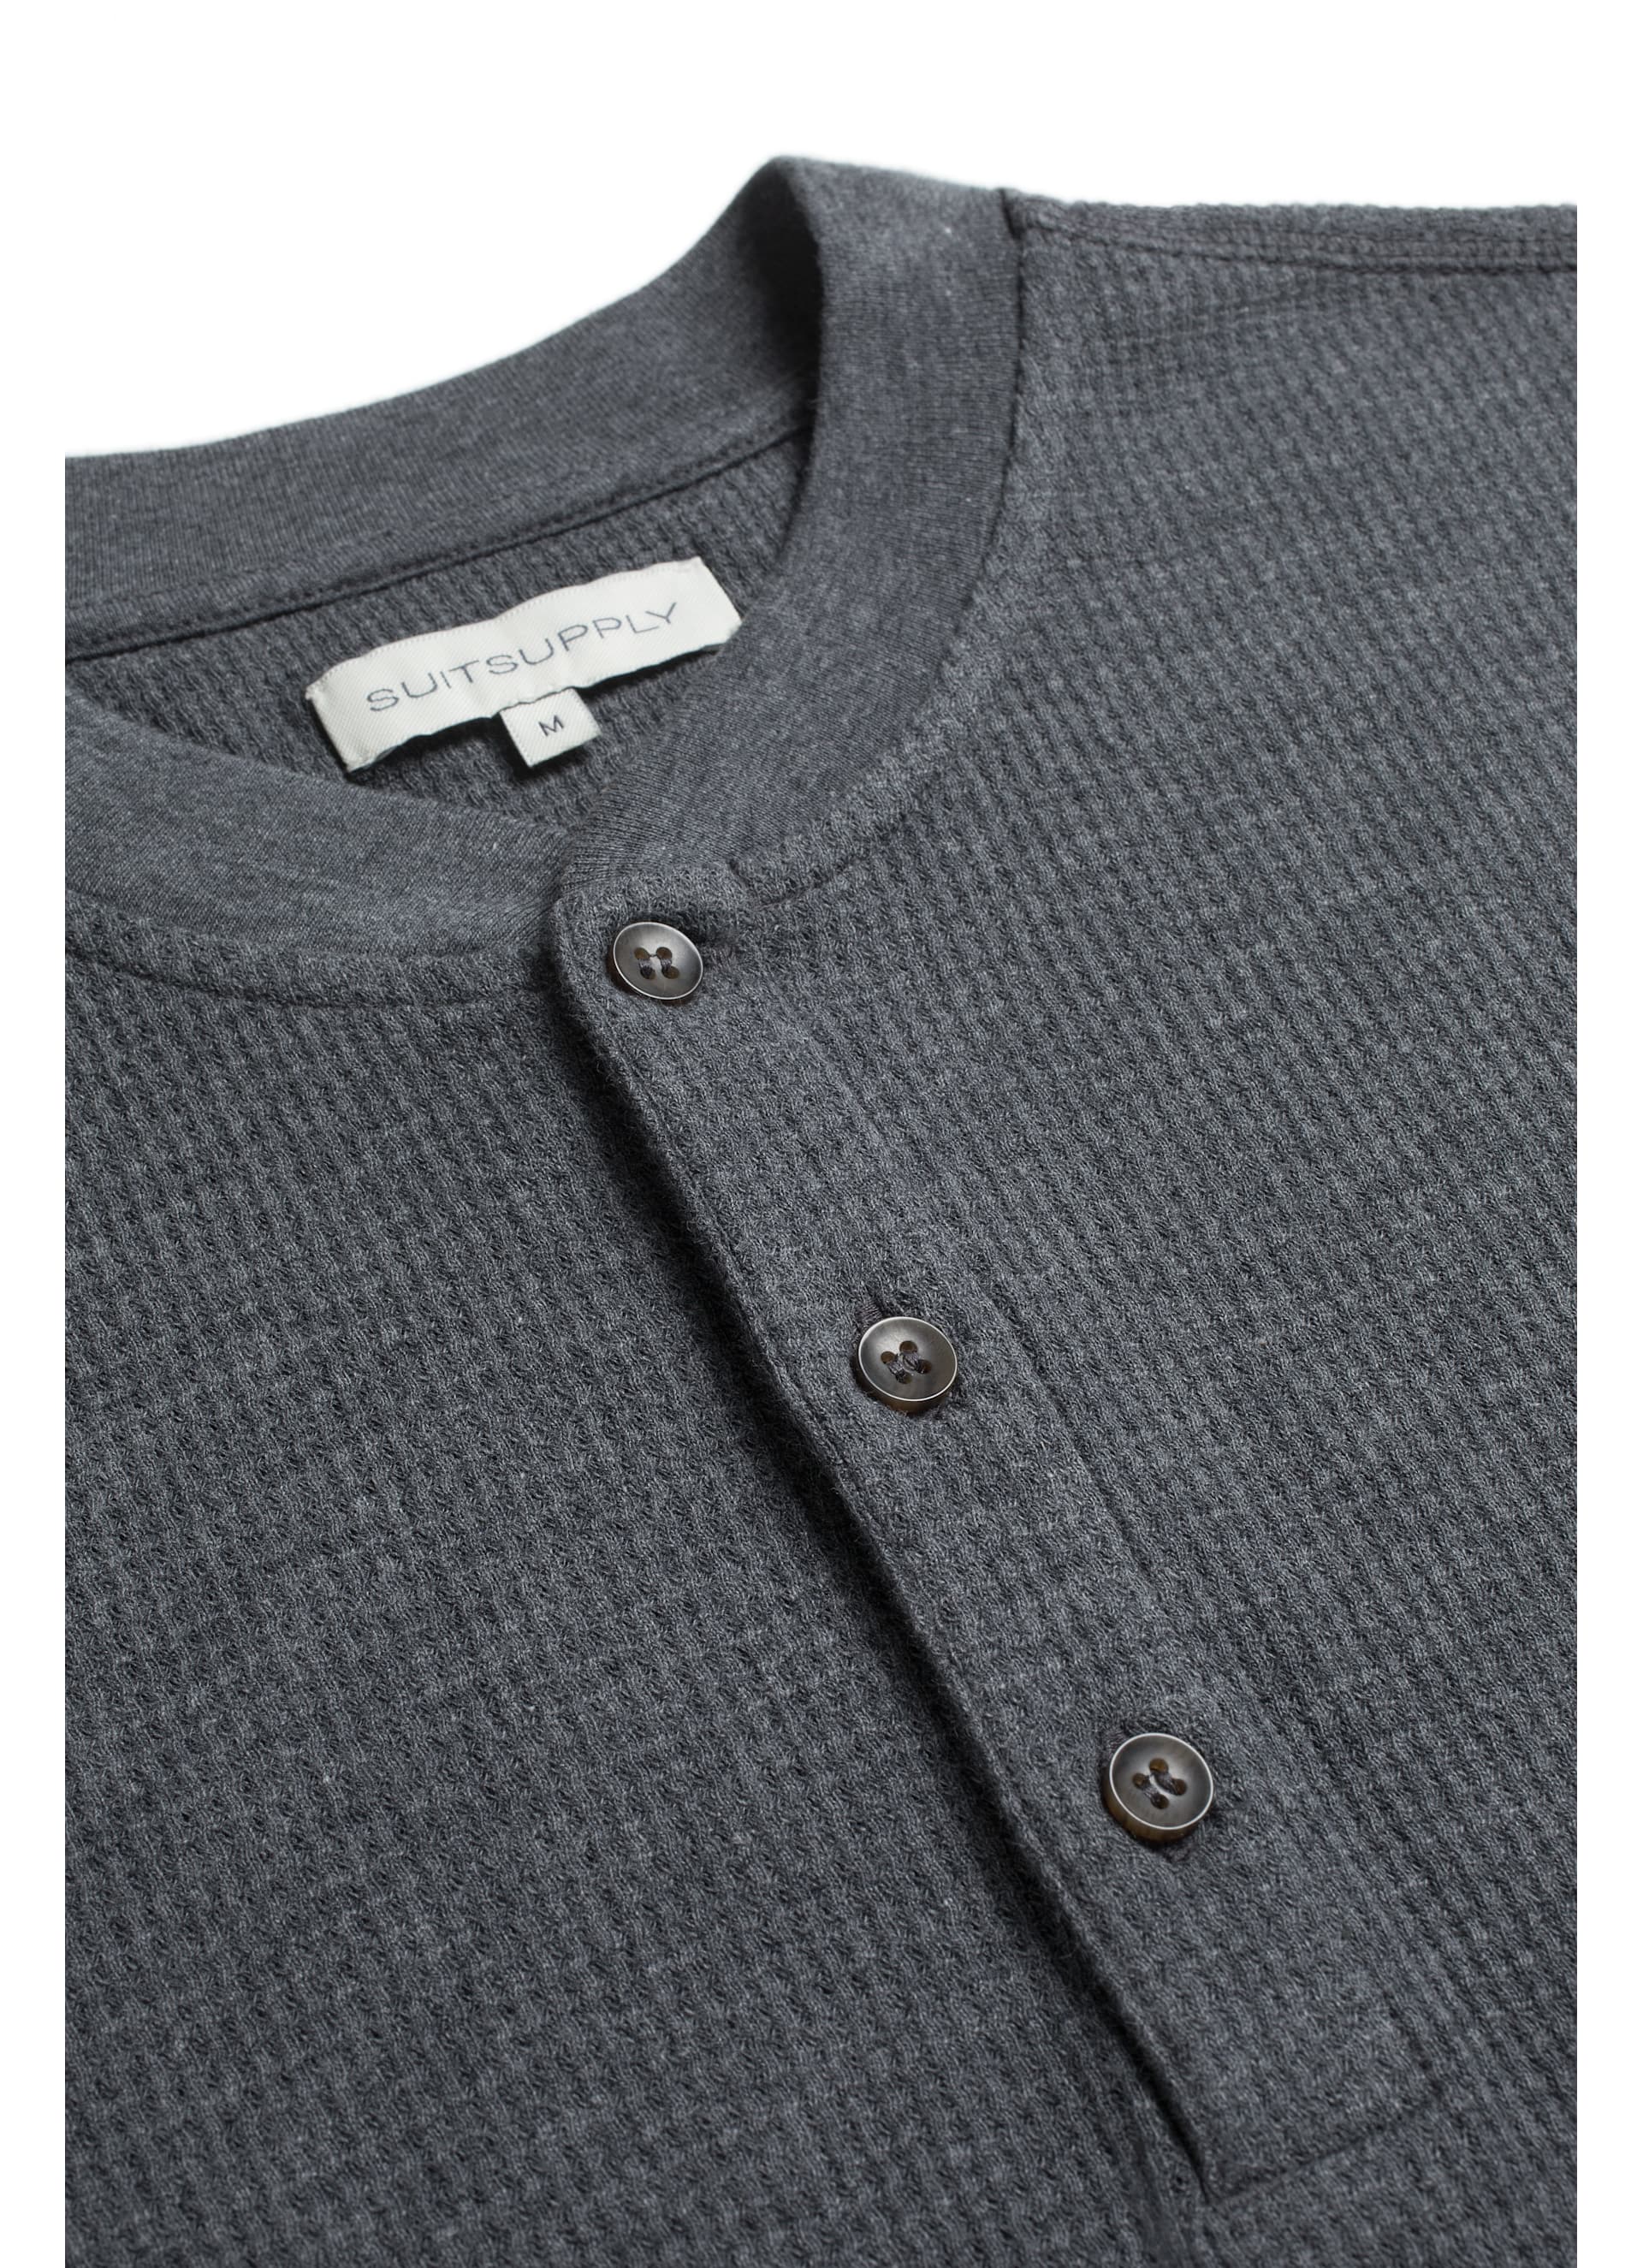 Grey Henley Sweater Sw771 | Suitsupply Online Store